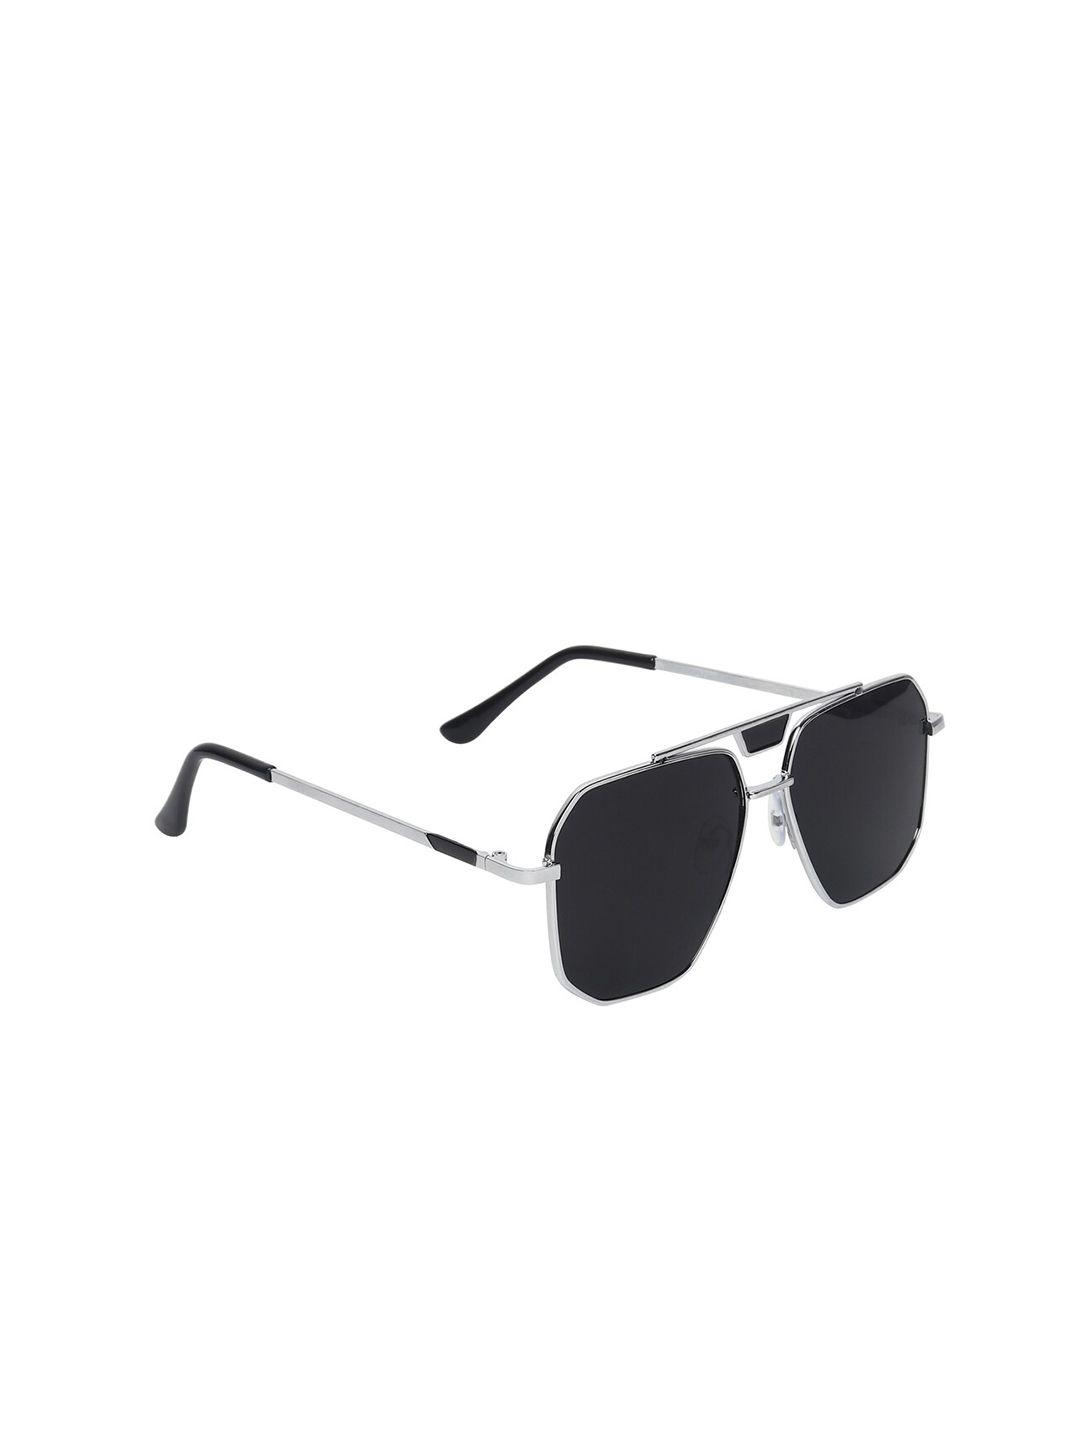 scaglia unisex black lens & silver-toned square sunglasses with uv protected lens